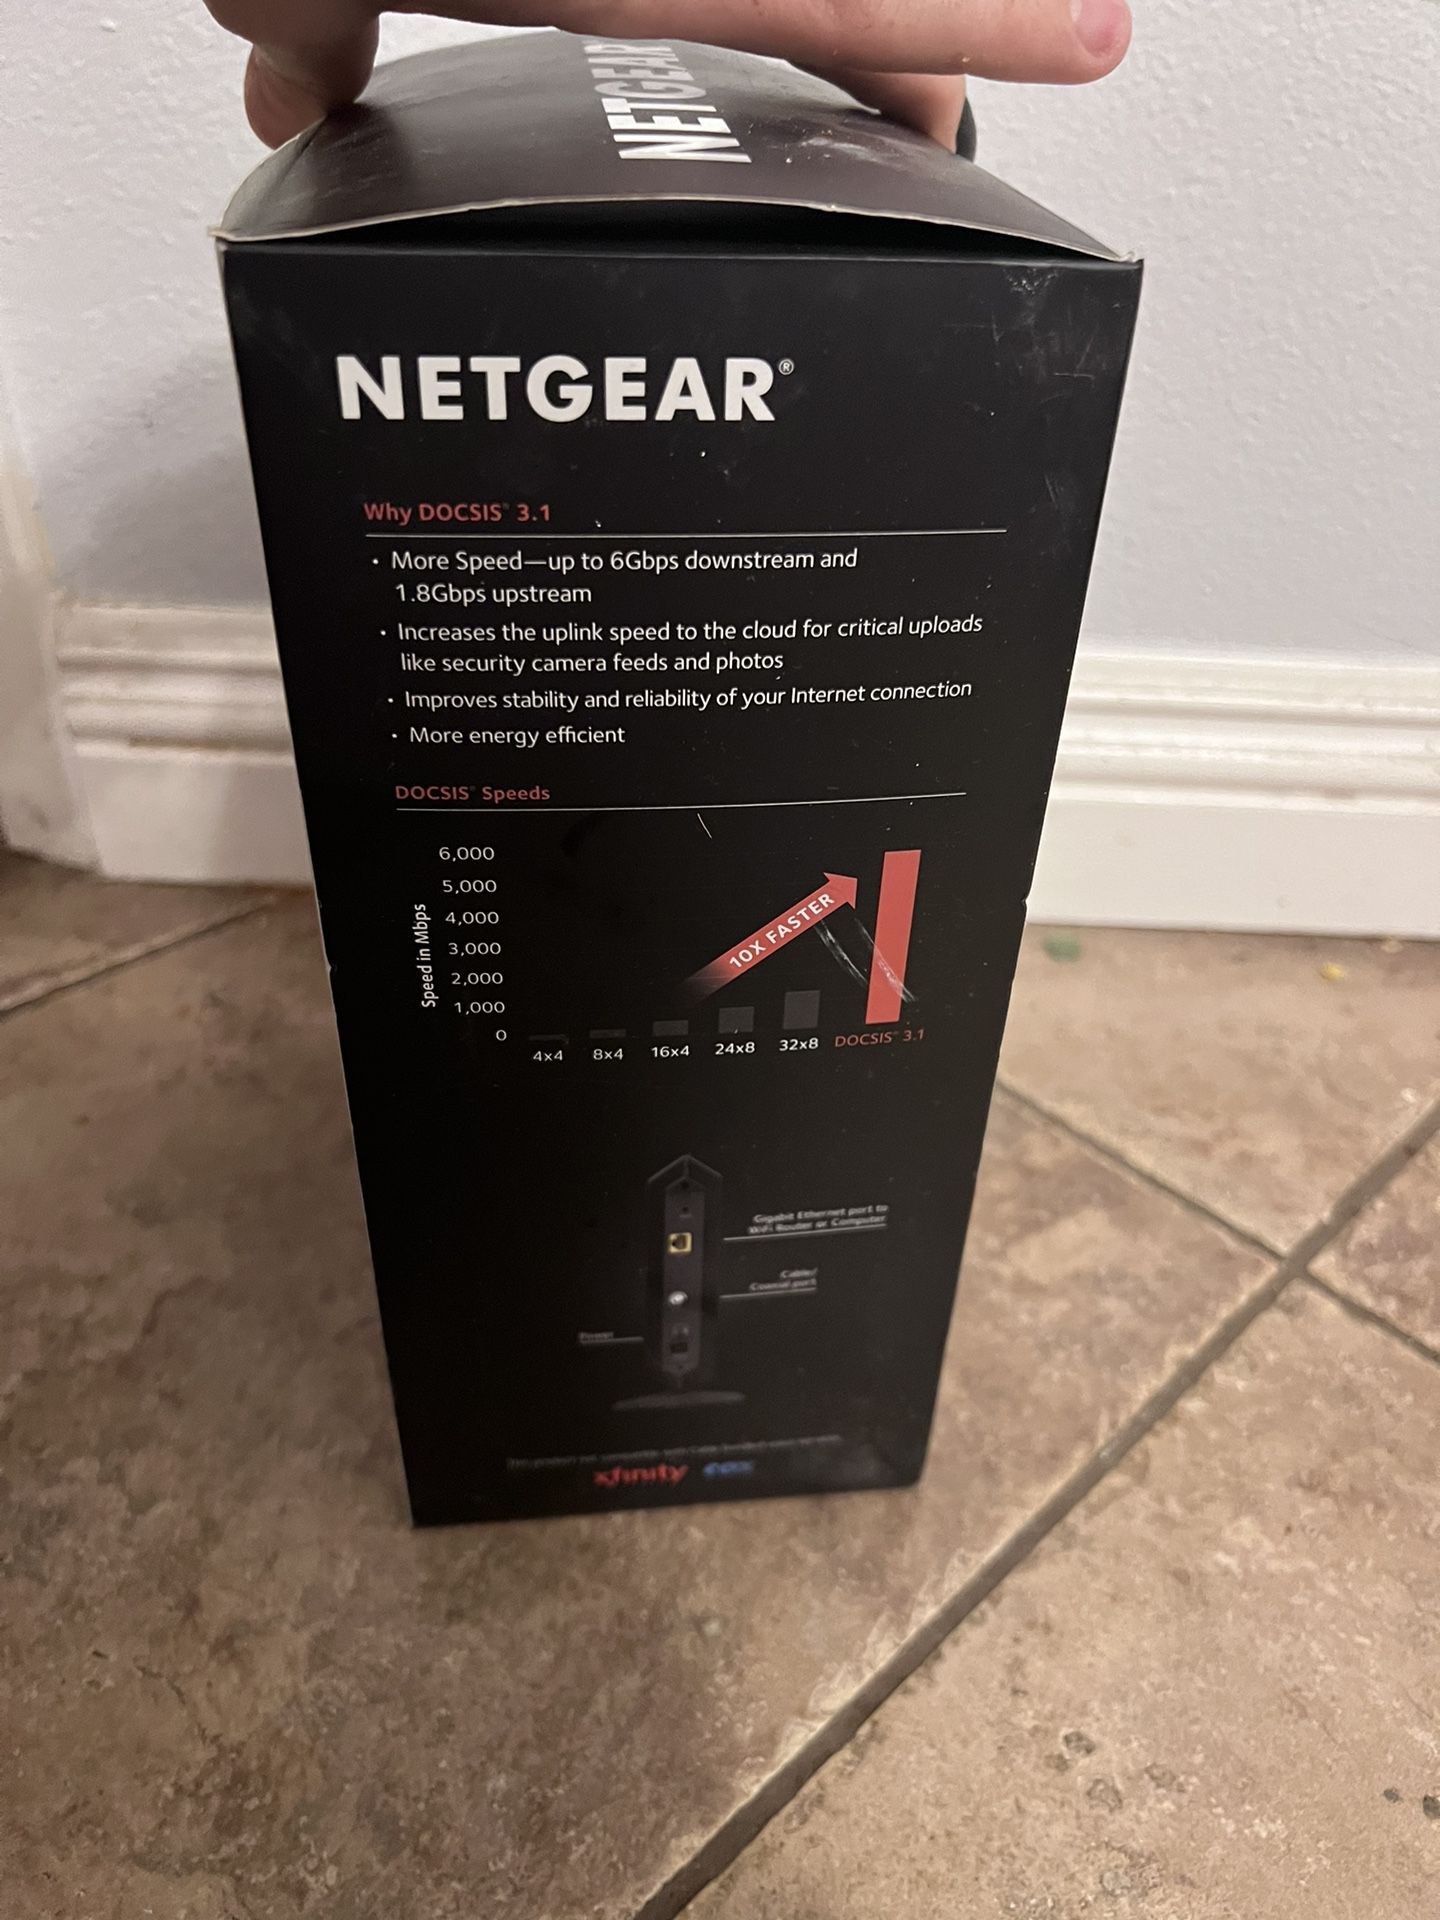 Net gear Internet Modem $10 And It’s Yours